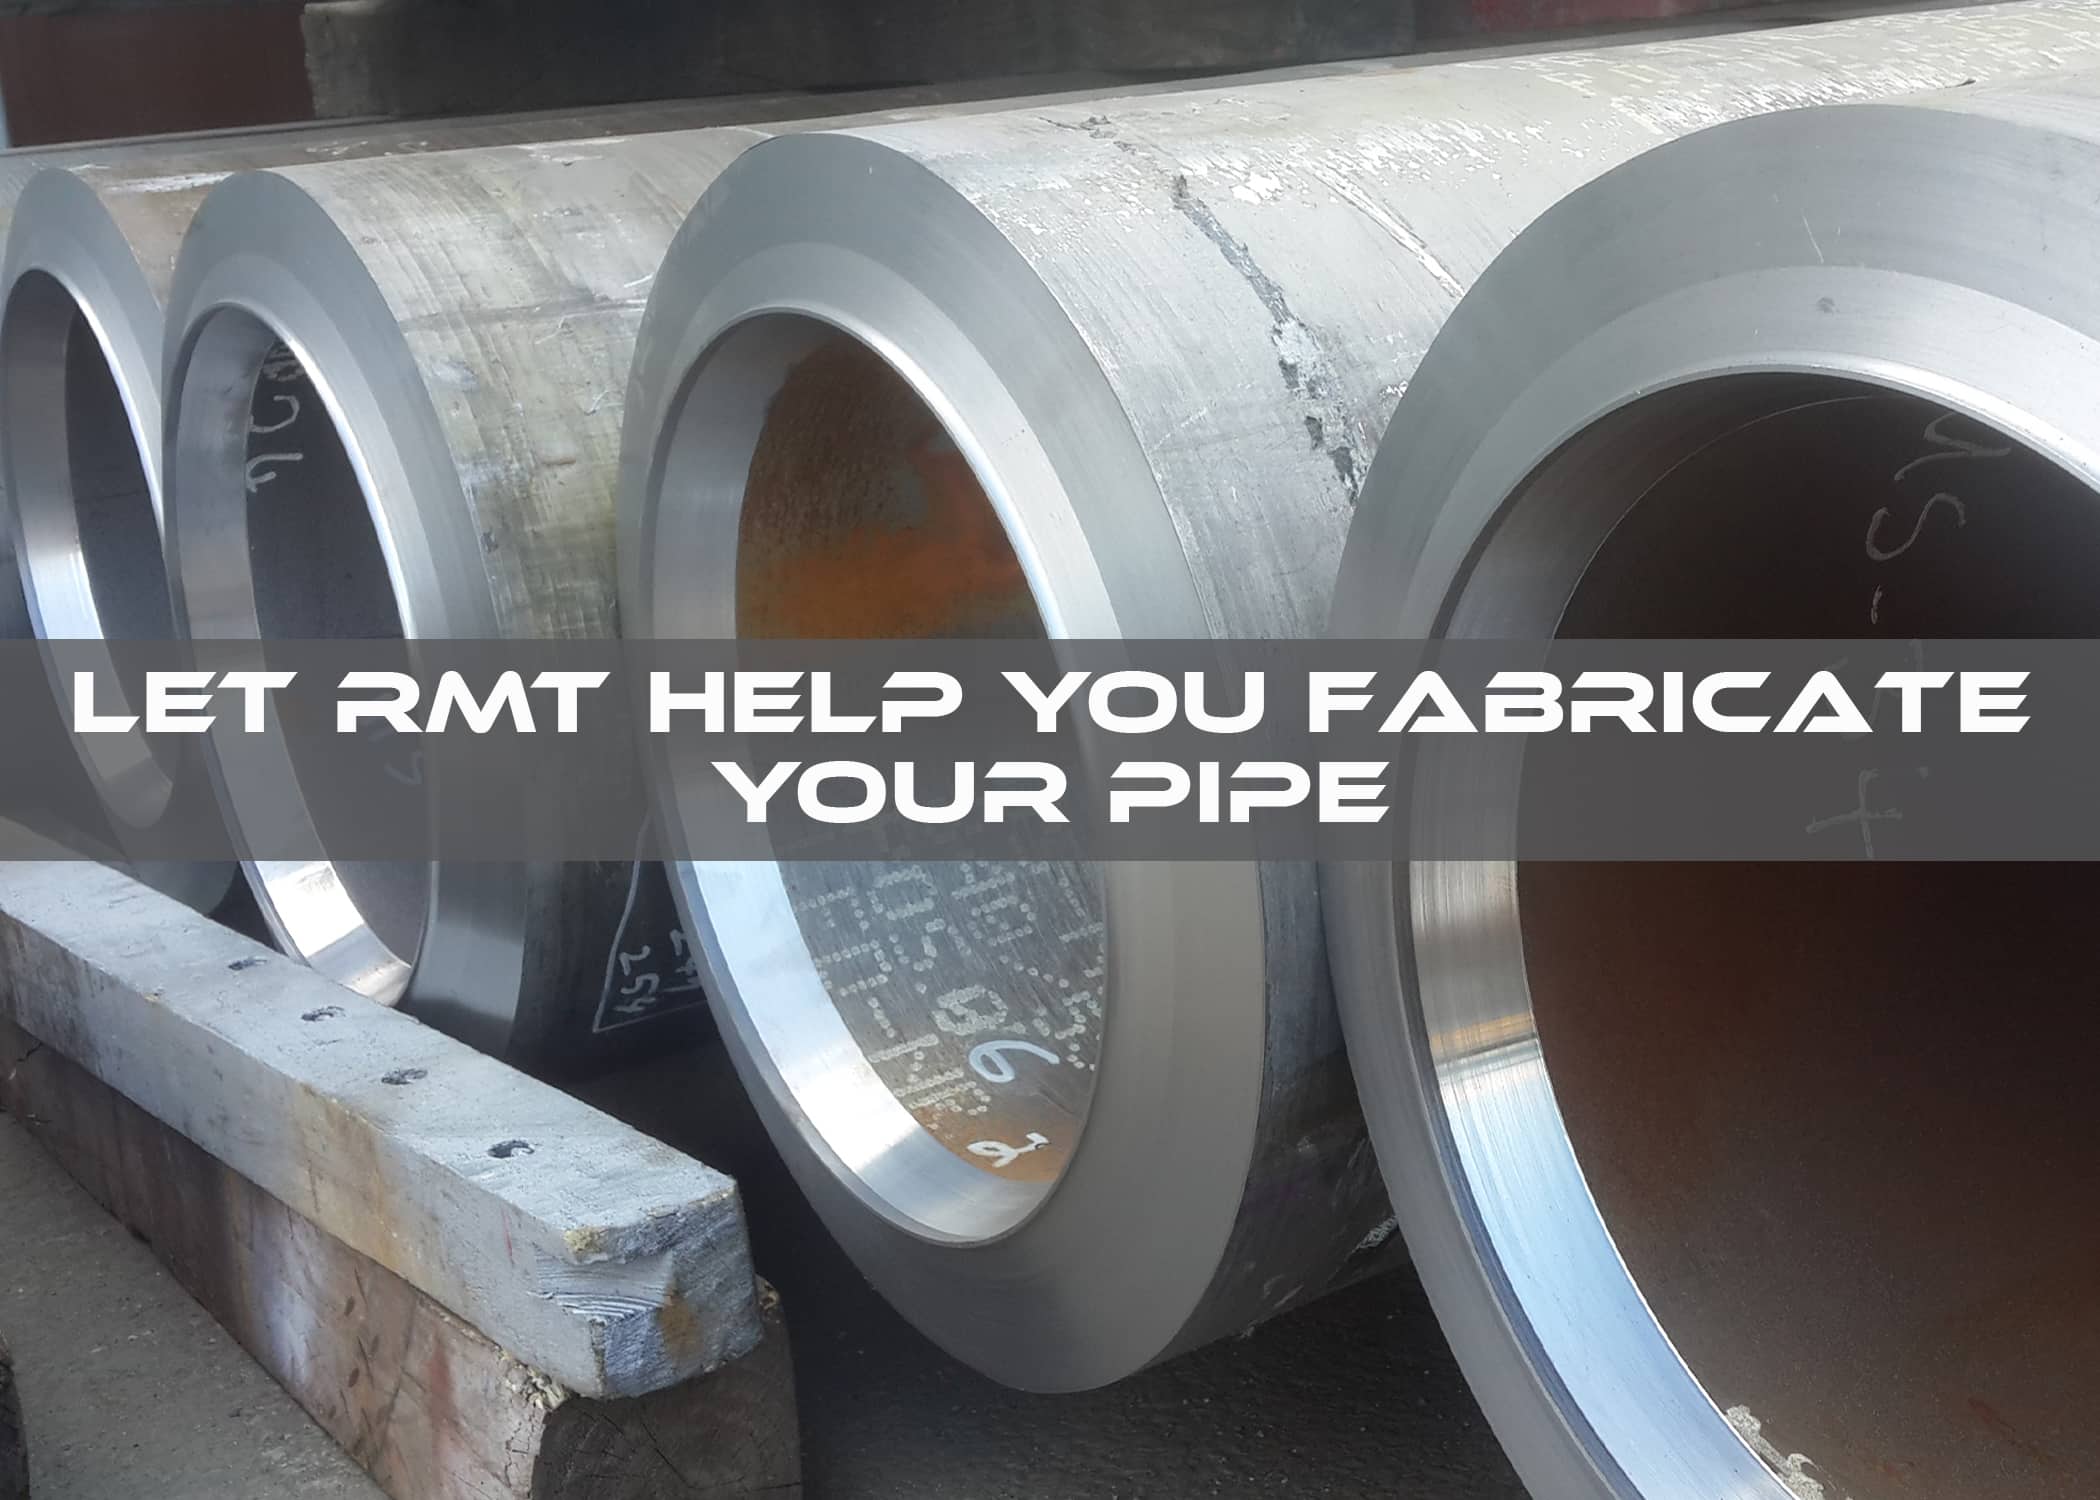 Let RMT Help You Fabricate Your Pipe